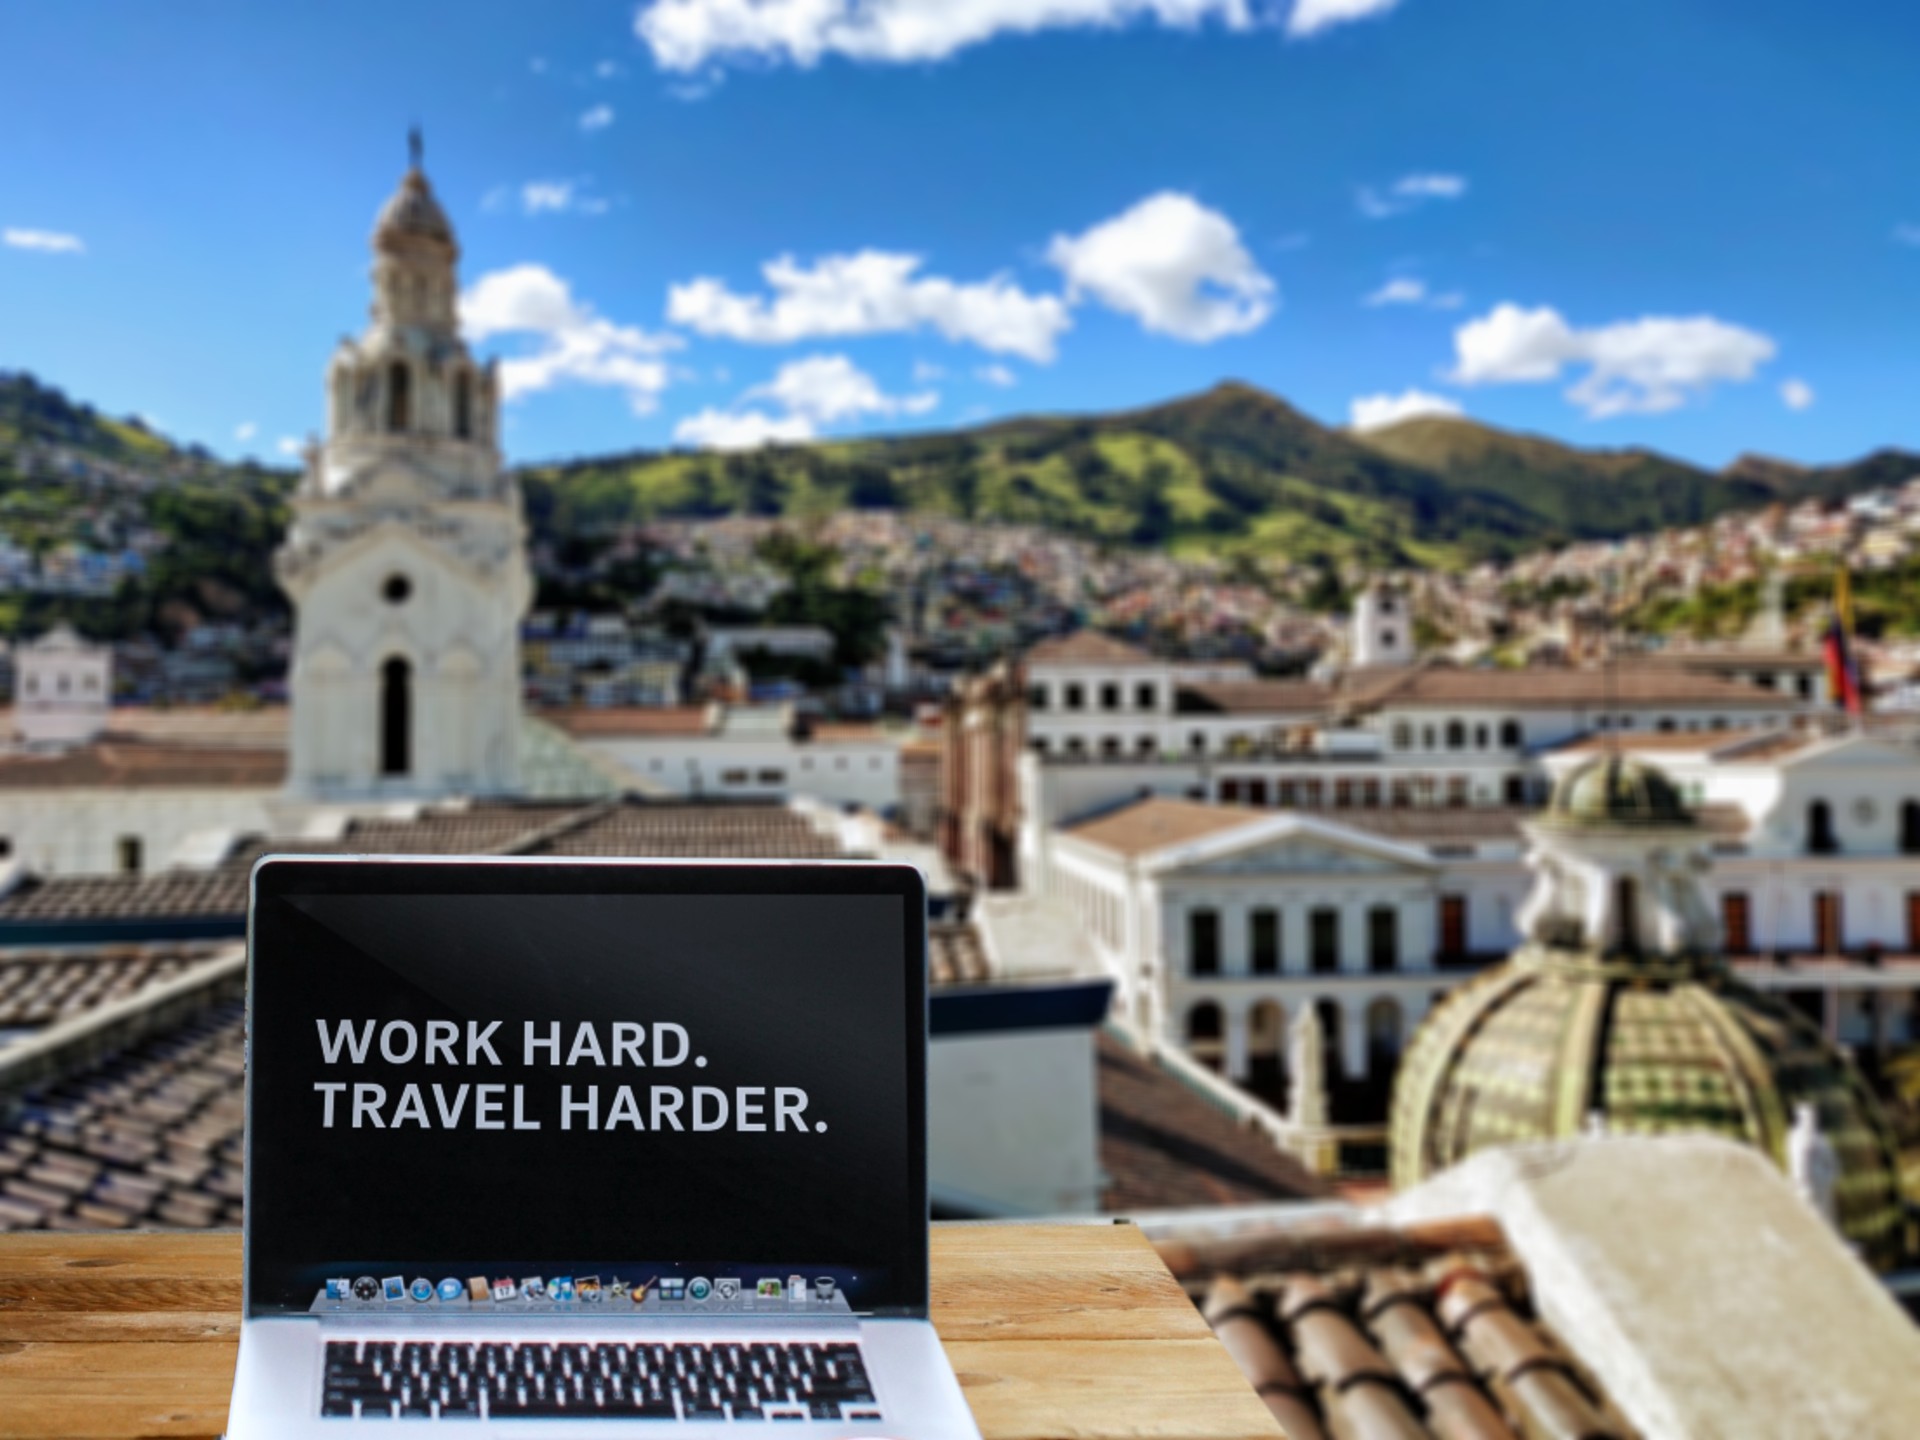 Ecuador the new potential office for Digital Nomads